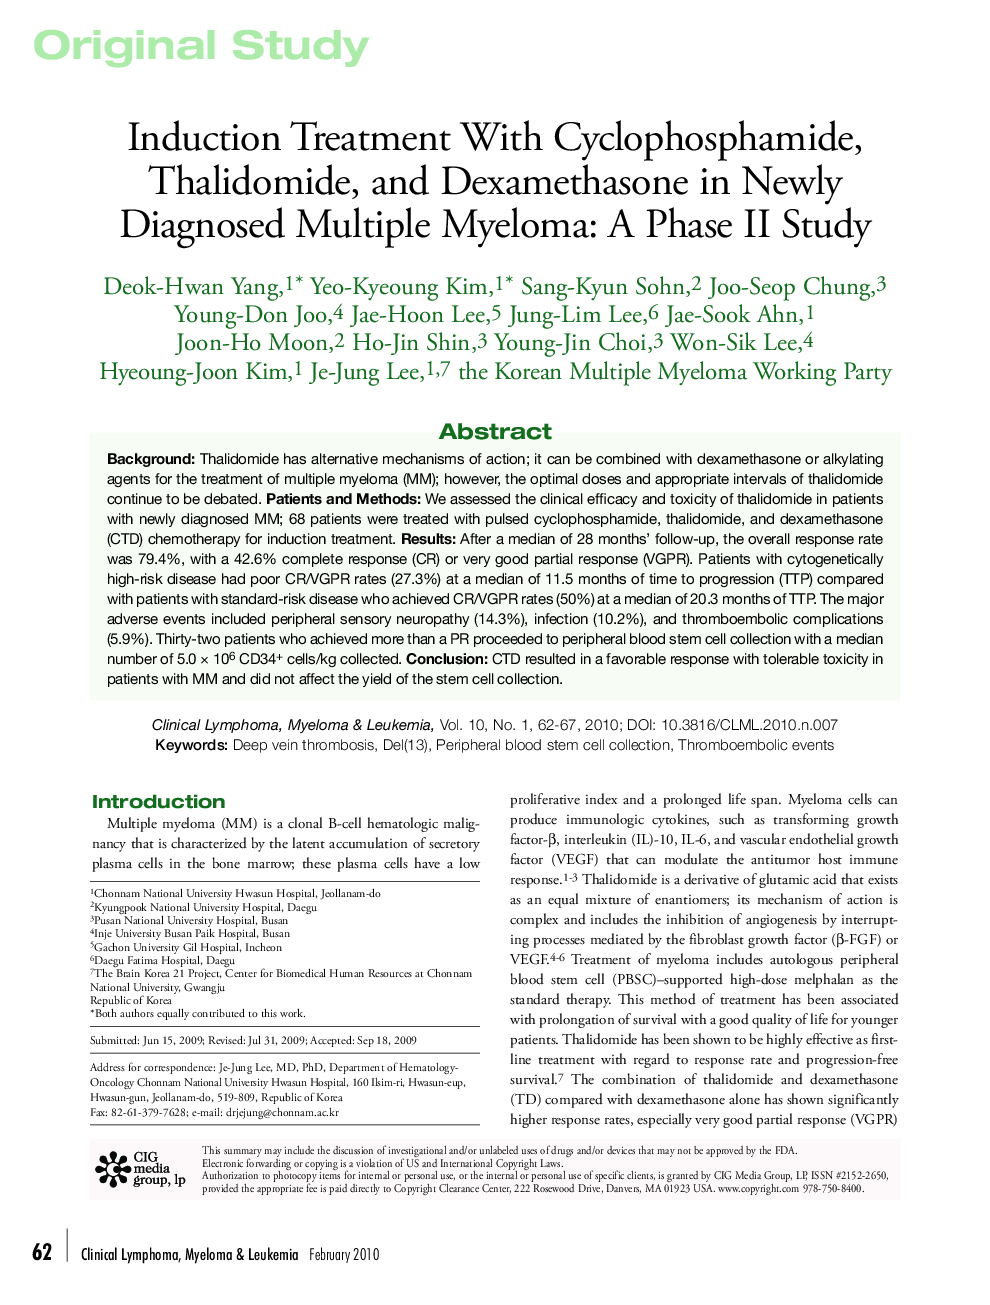 Induction Treatment With Cyclophosphamide, Thalidomide, and Dexamethasone in Newly Diagnosed Multiple Myeloma: A Phase II Study 